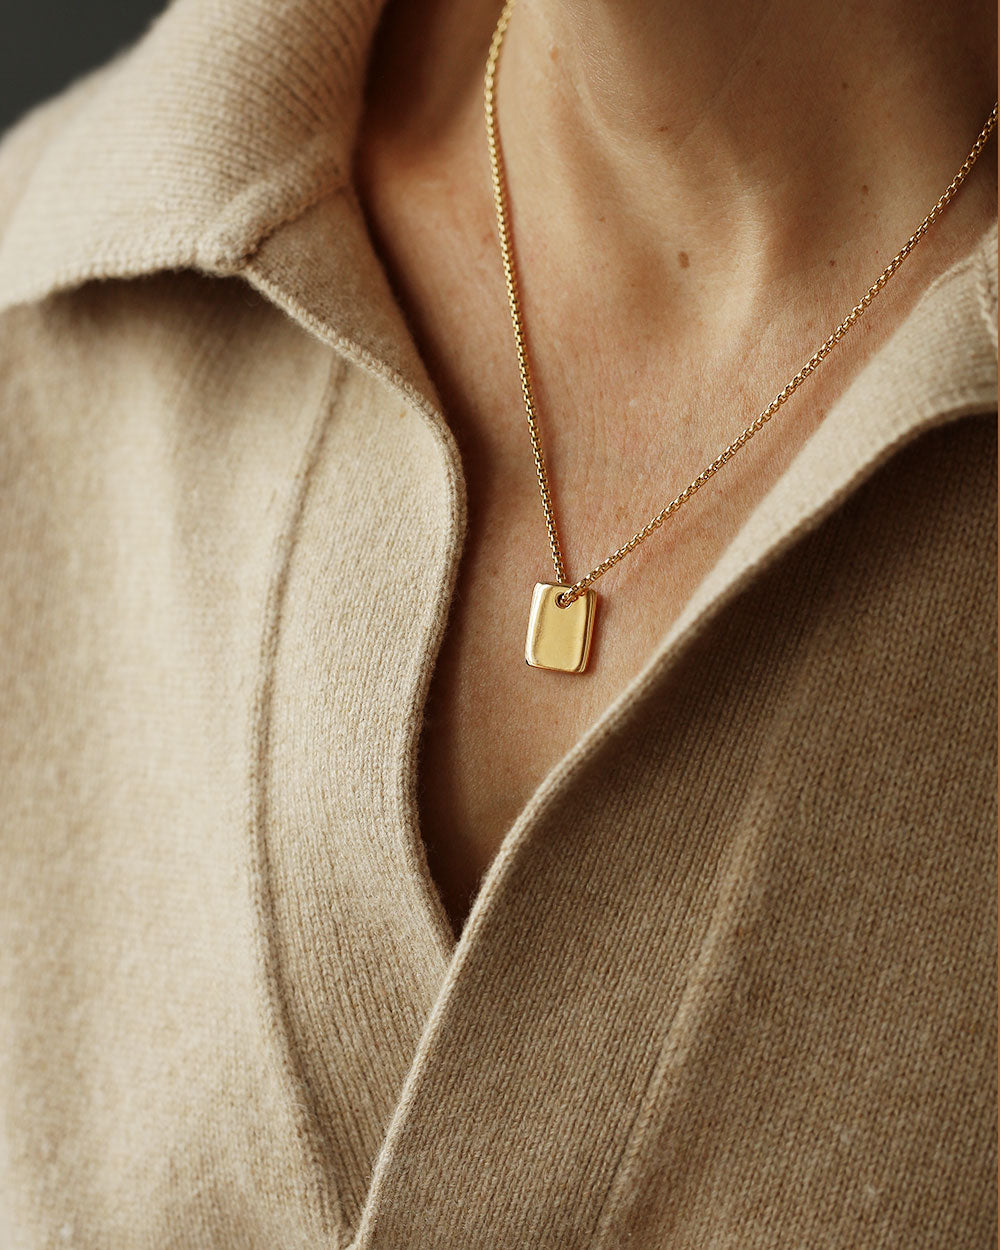 Woman in cashmere sweater wearing a Gold Luggage Tag necklace by Carol Leskanic and George Rings 14k round box chain